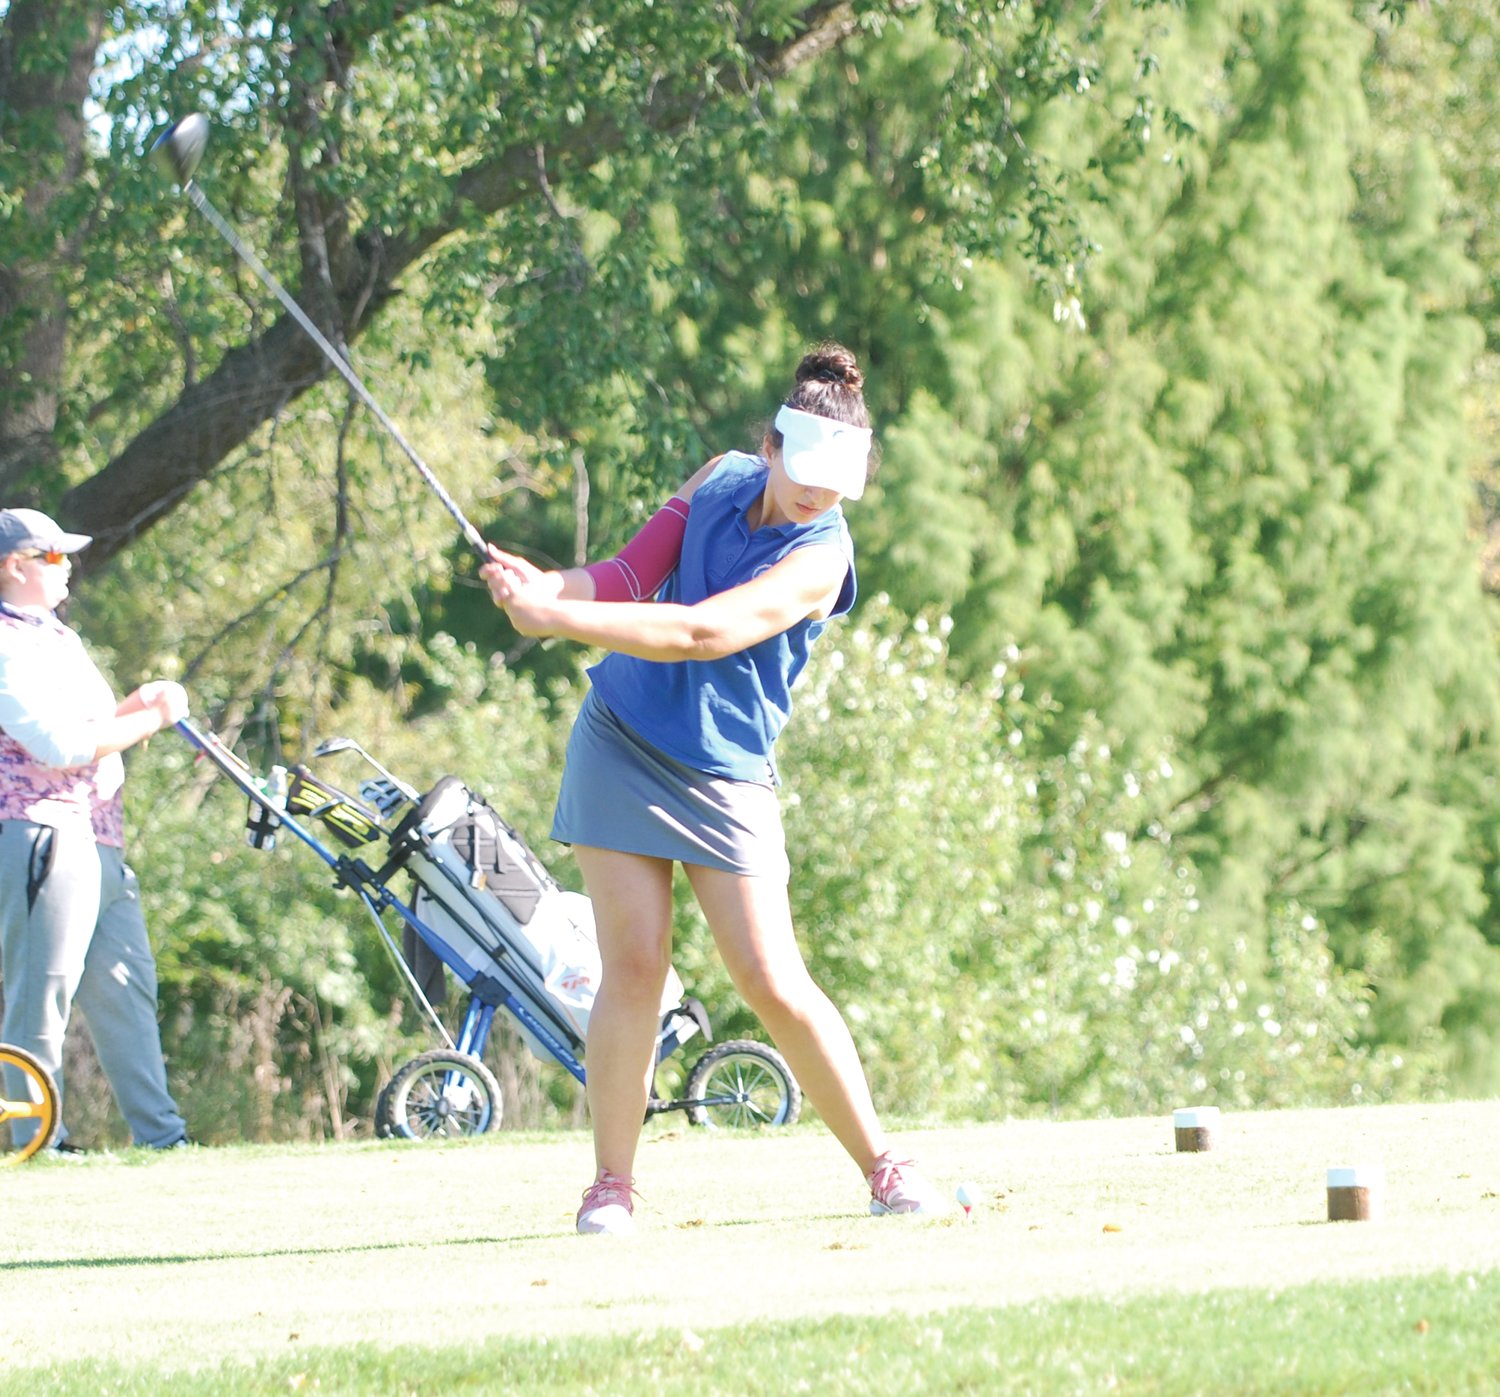 Crawfordsville's Bailey Mittal led the Athenians to a third-place finish at the IHSAA Sectional in September. The senior fired a 94, which was the fifth best score of the tournament.